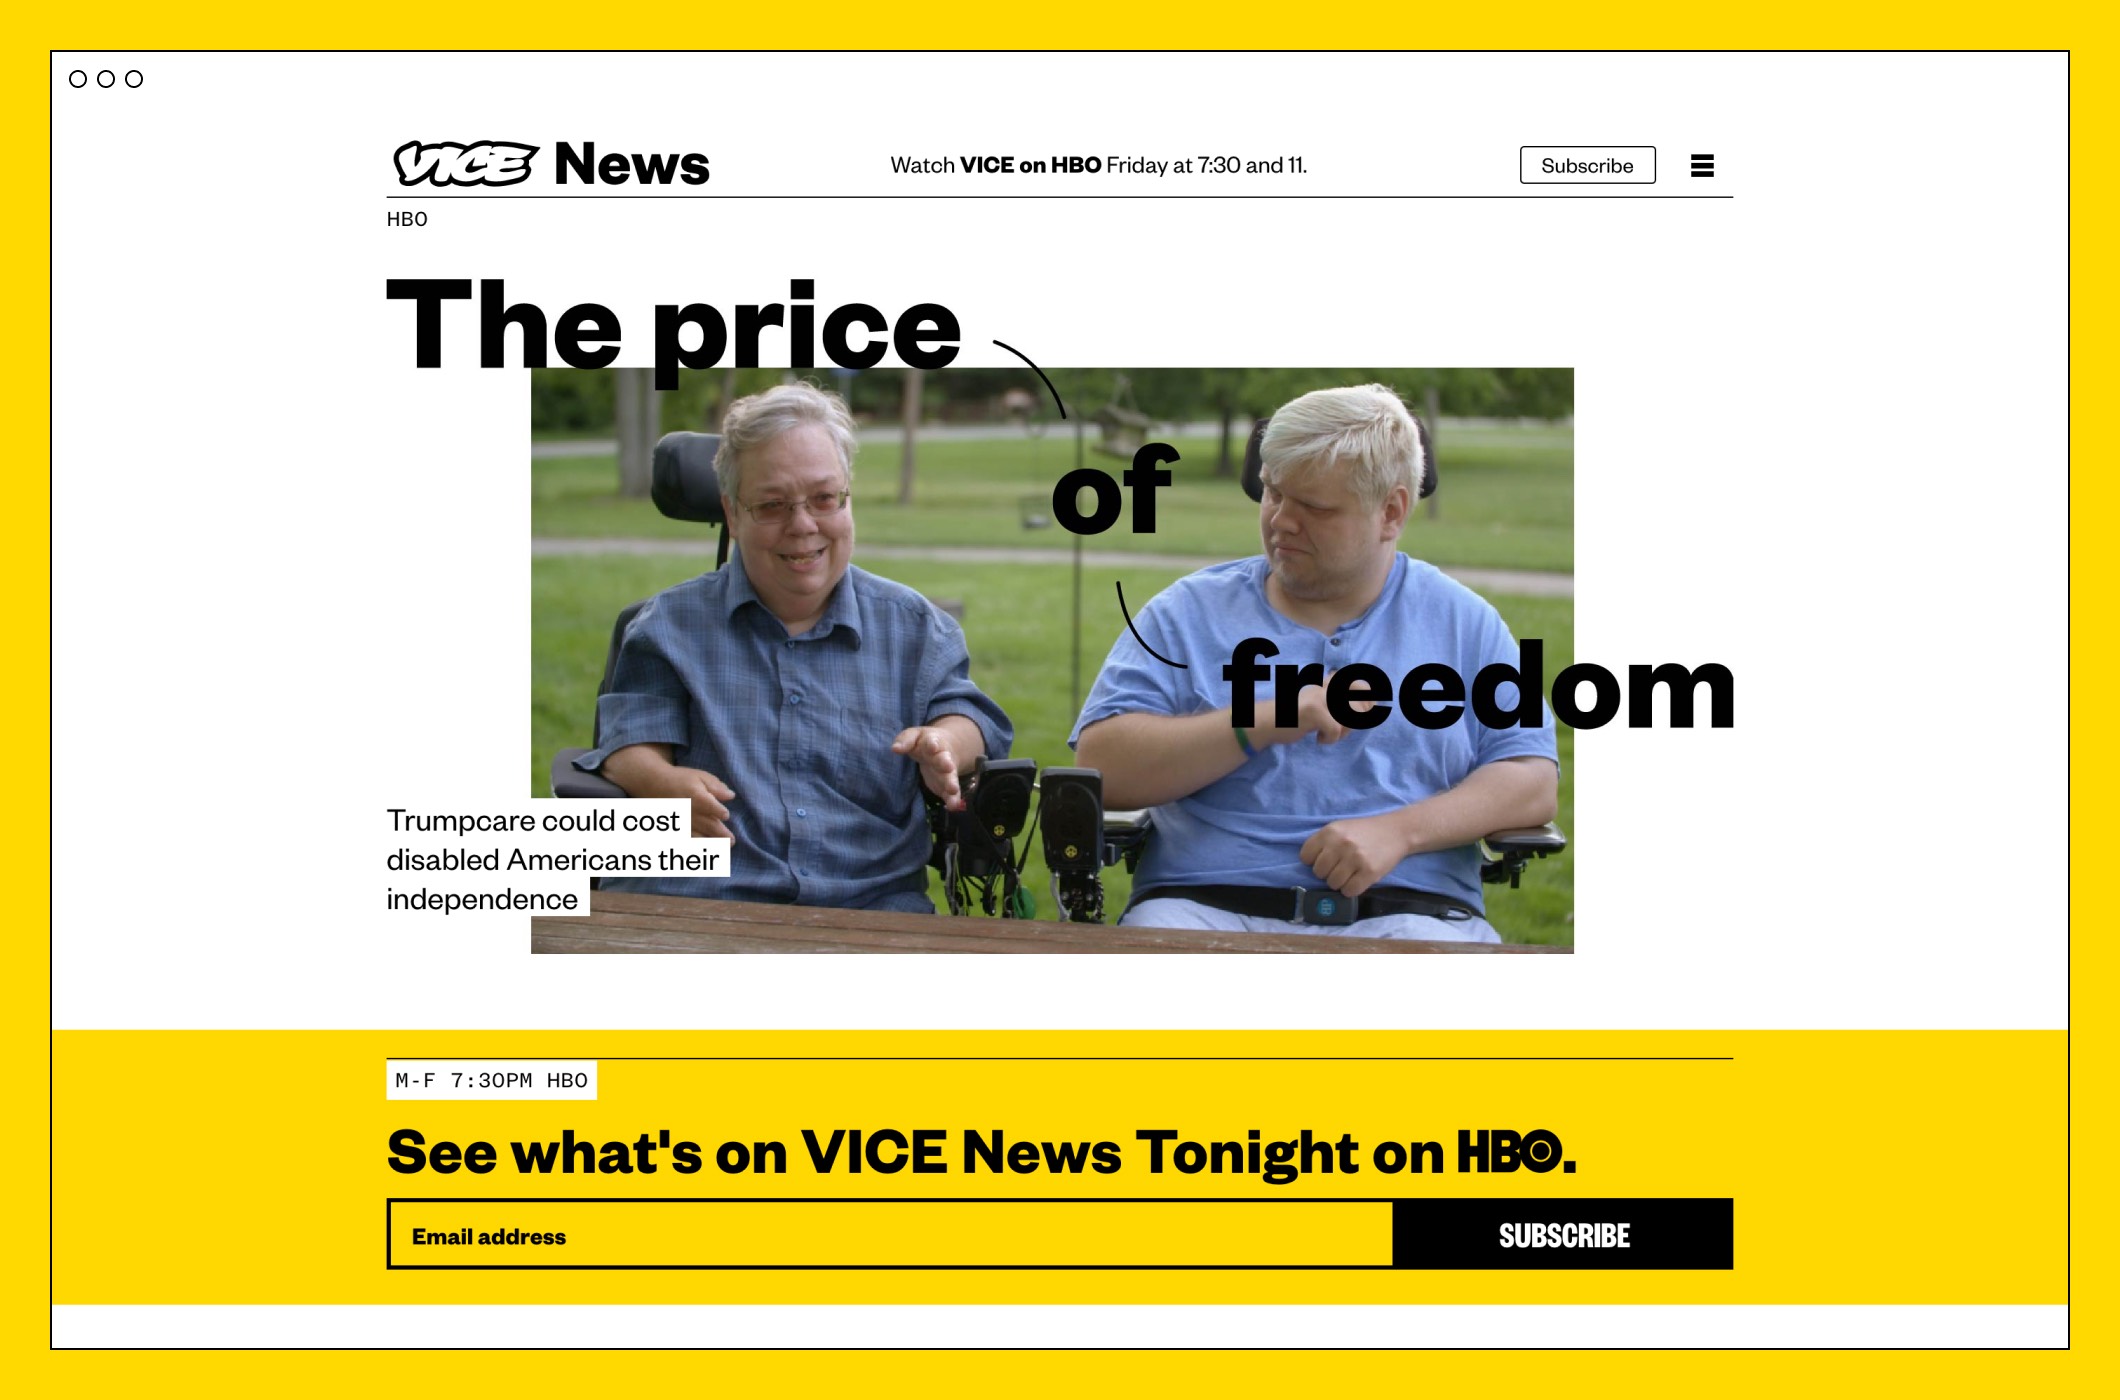 Illustrative Vice News article on the homepage feed